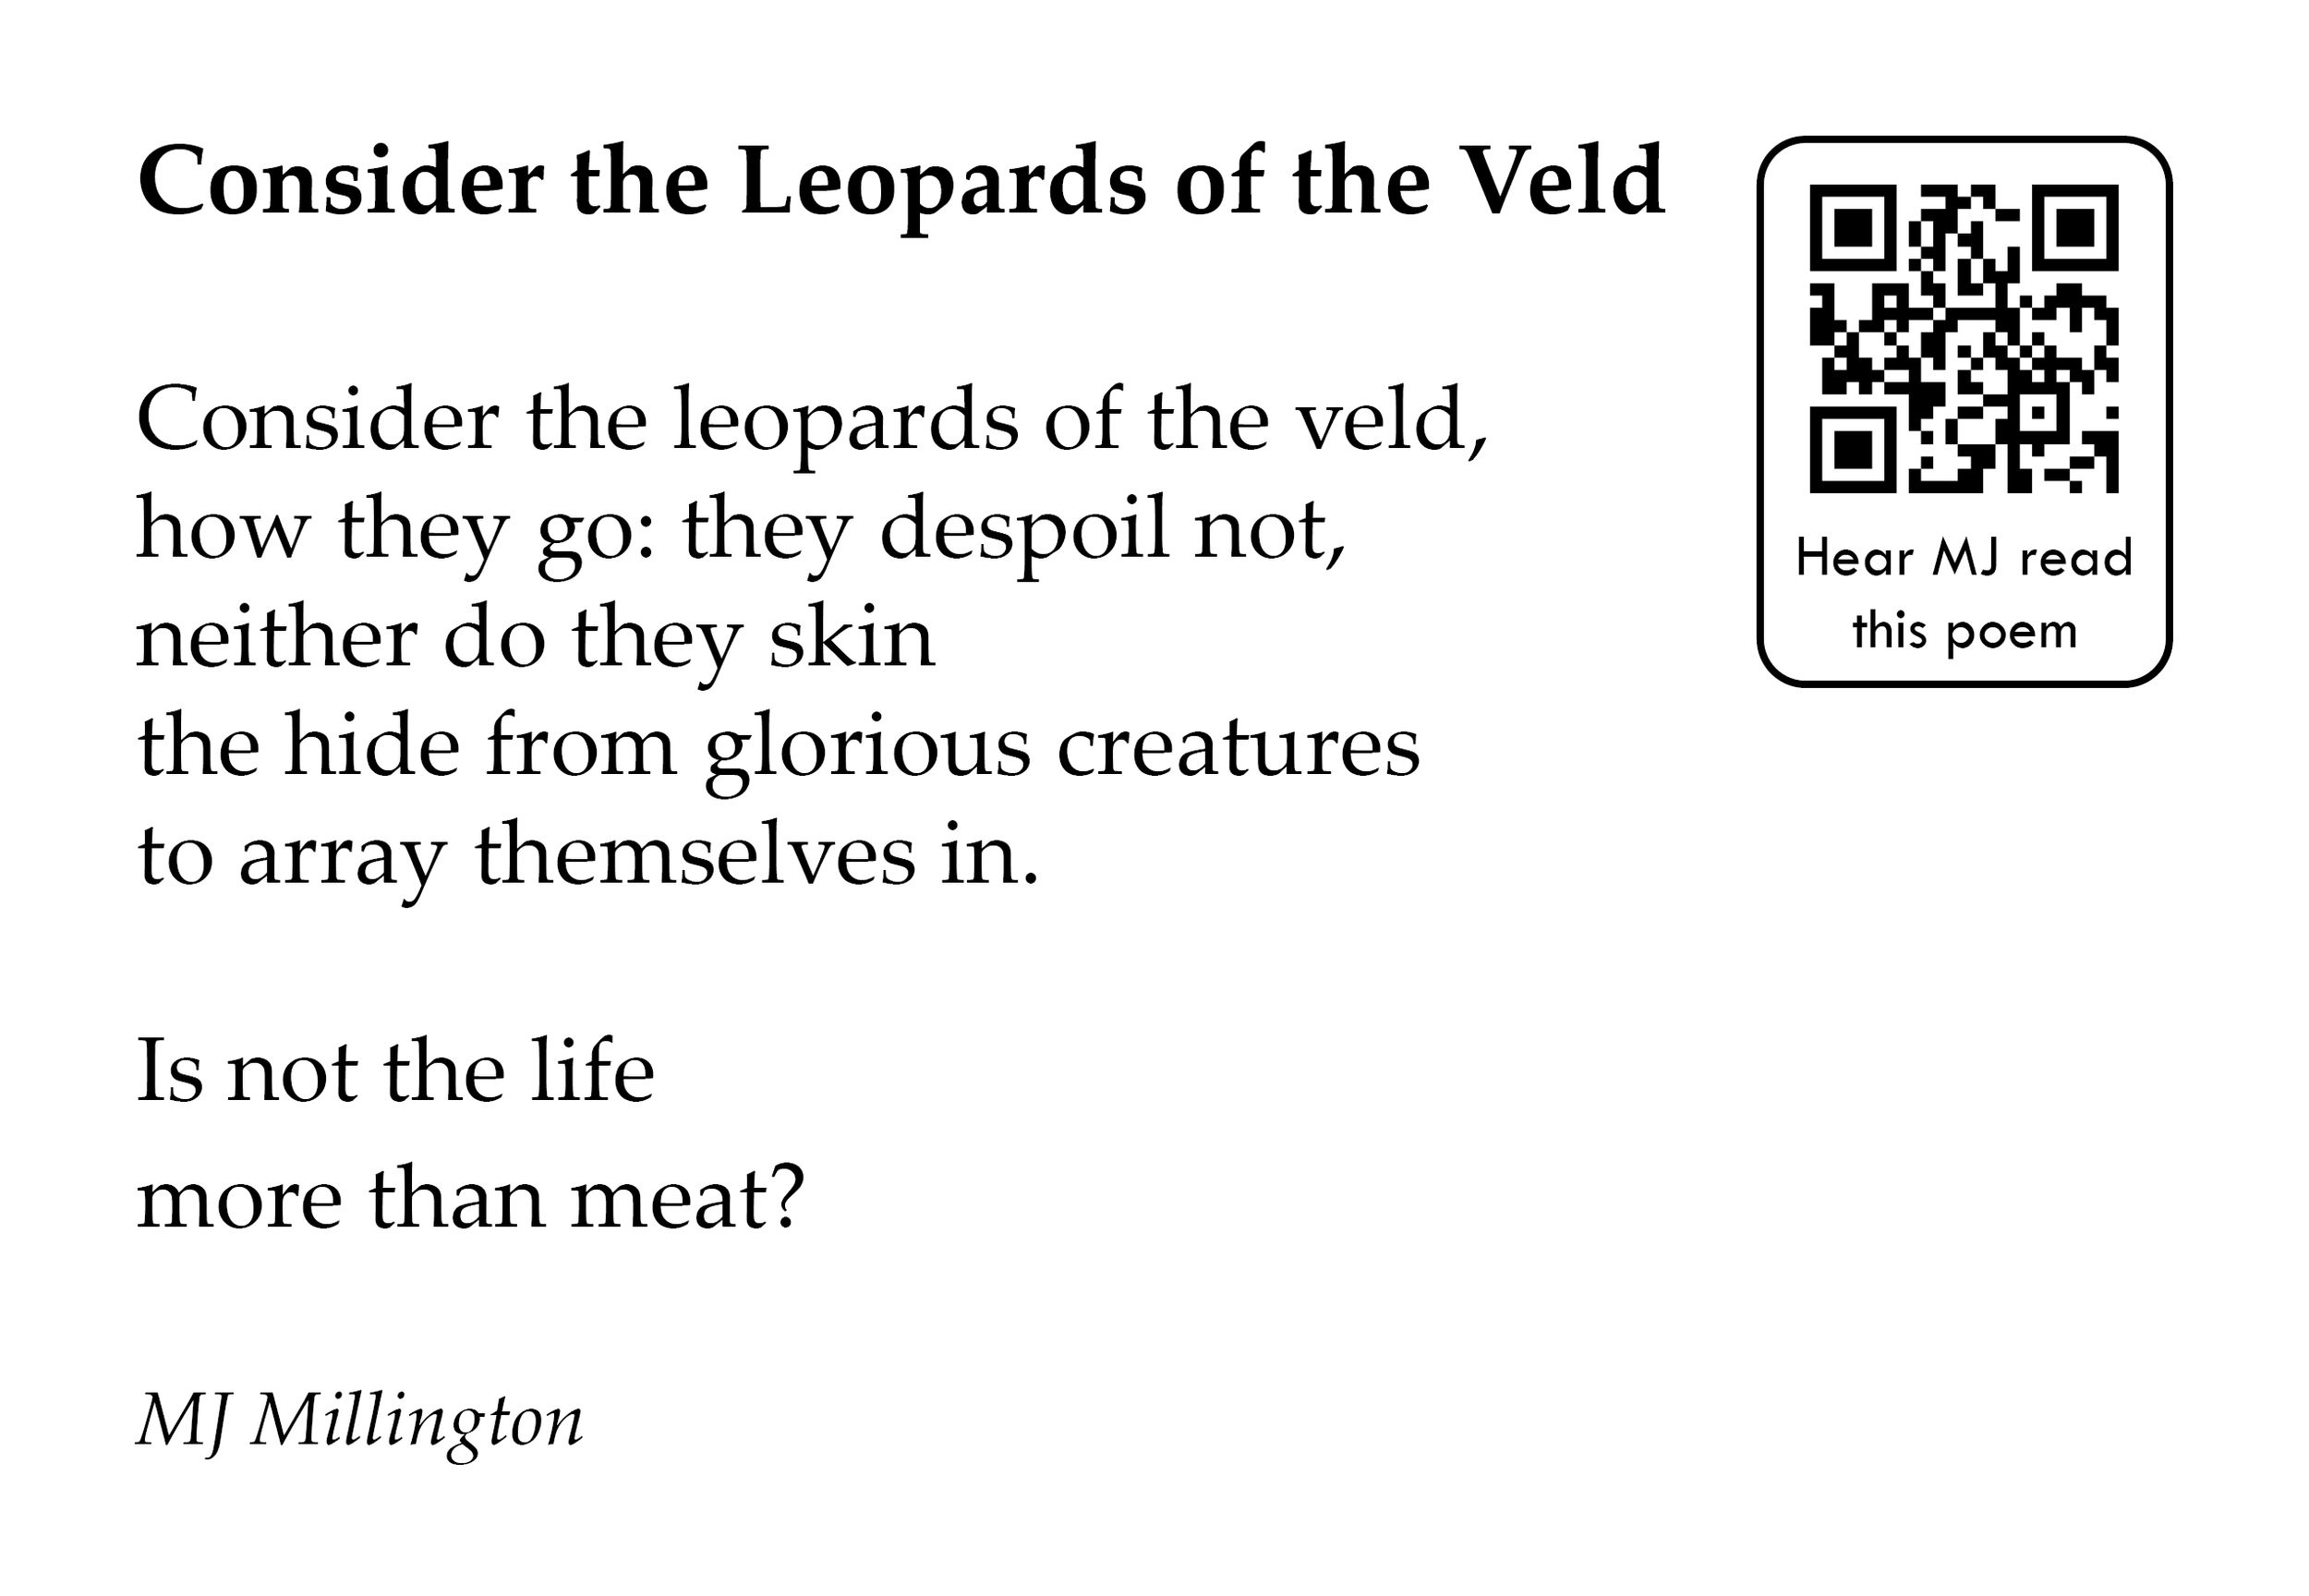 Consider the Leopards of the Veld (leopard) - crop.png